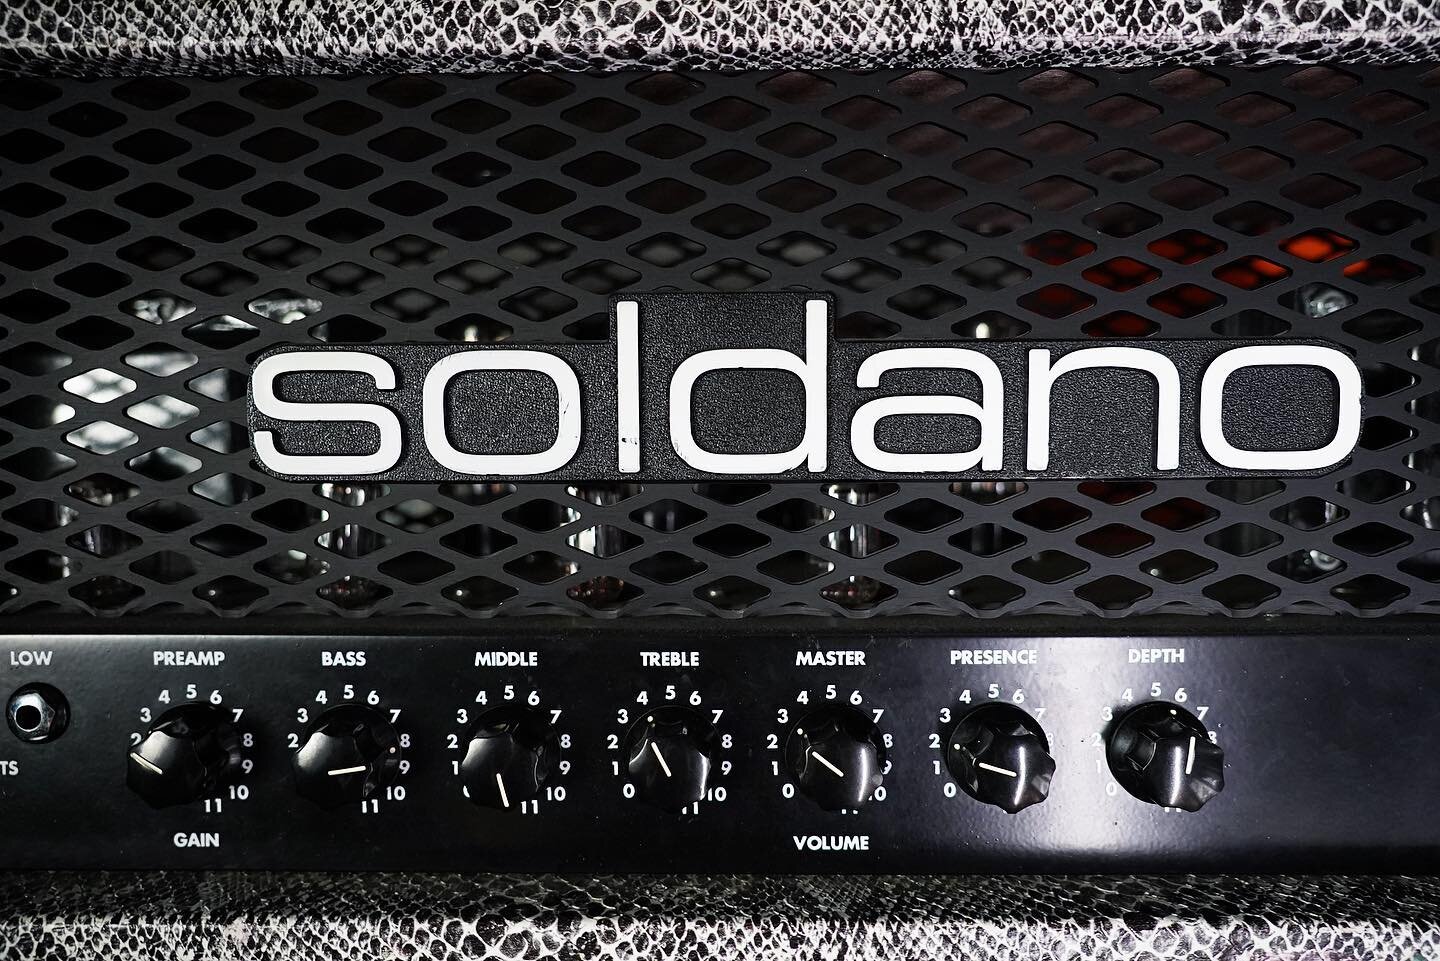 What&rsquo;s your go-to amp for solos?&thinsp;
&thinsp;
My (snakeskin 😬) Soldano Avenger is the easy favorite for guitar leads around here.&thinsp;
&thinsp;
#soldano #guitar #recording #recordingstudio #guitarsolo #amp #gearporn #gearybusey #knowyou